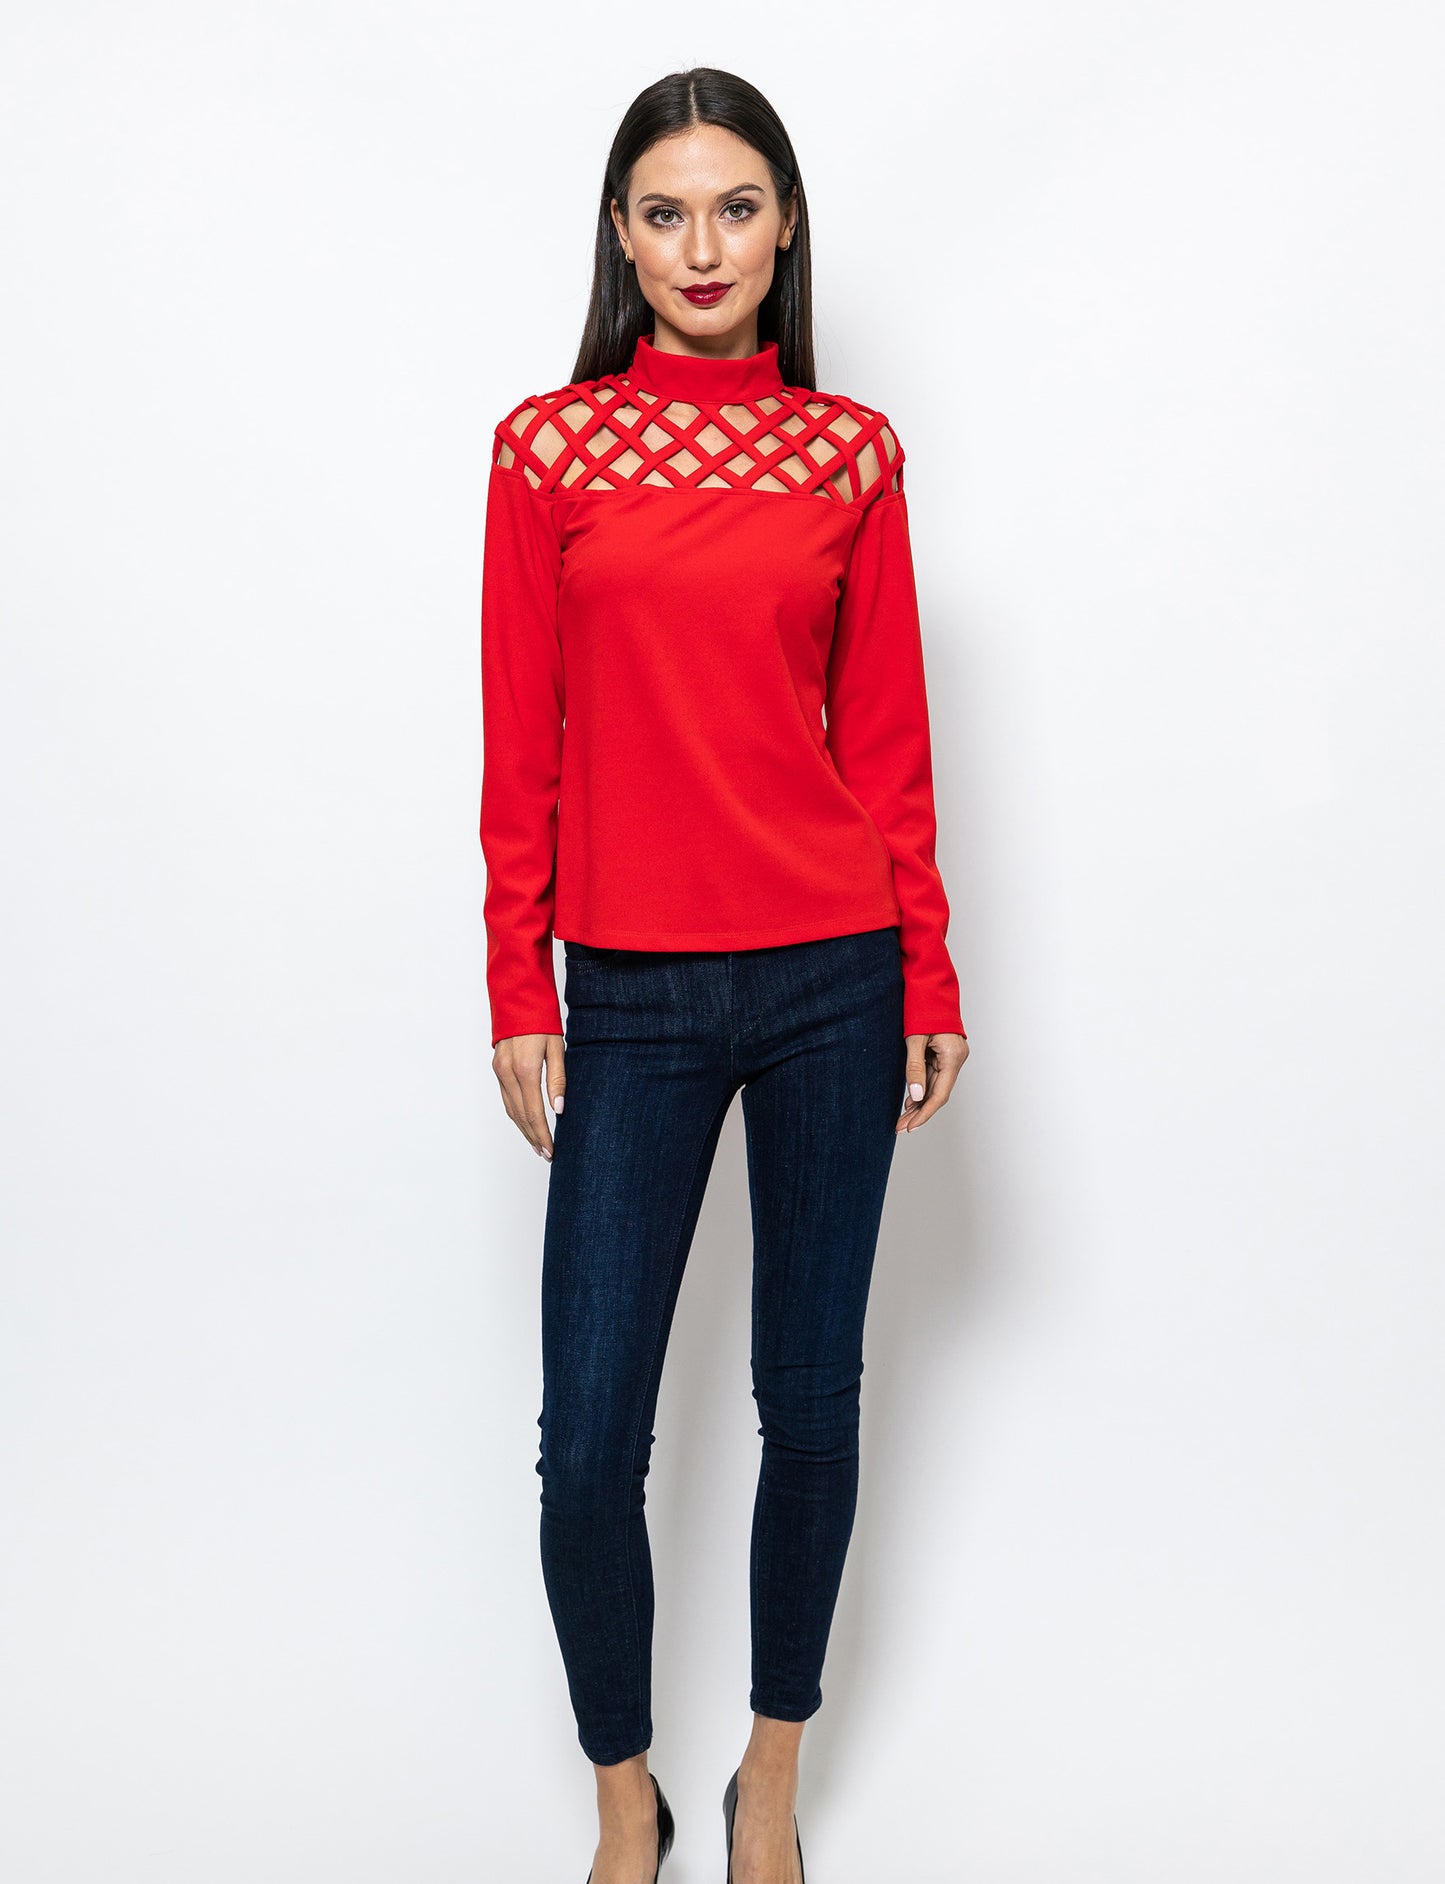 Truly Bold Caged Cut-out Maggie Blouse